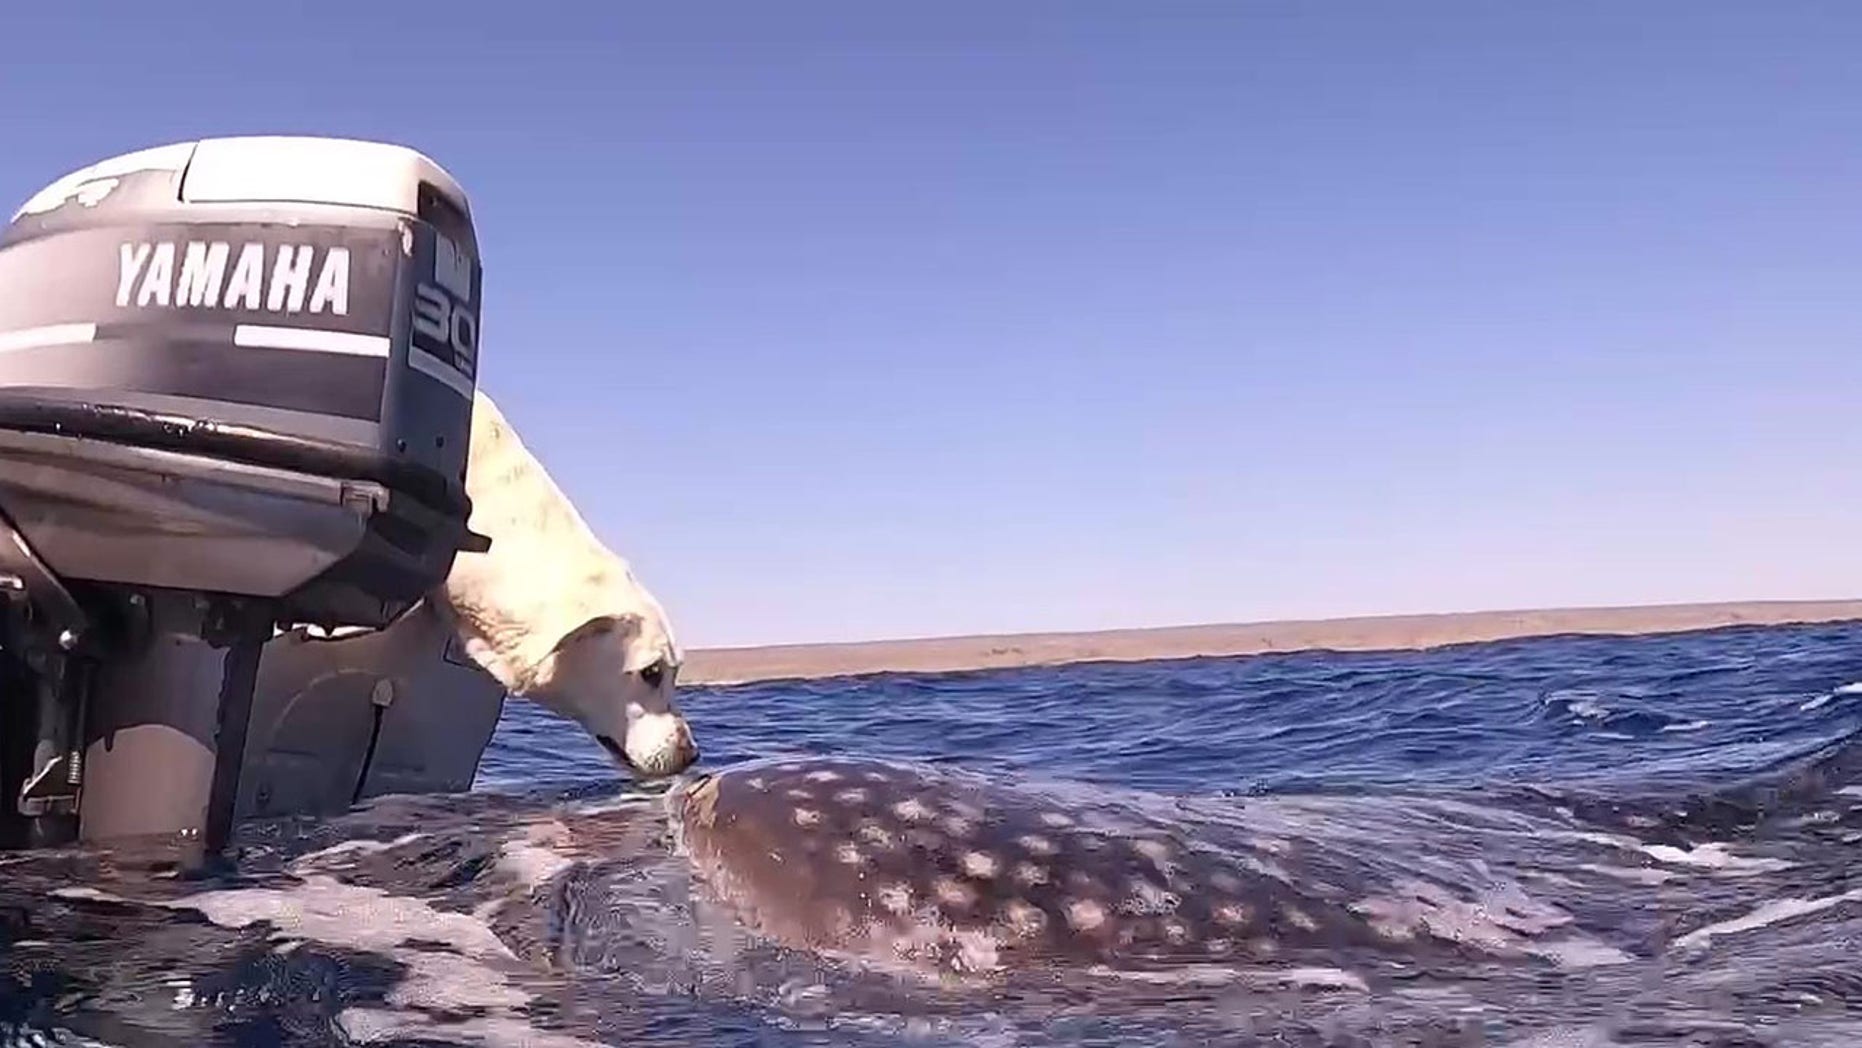 dog on a boat kissing a whale shark in the ocean